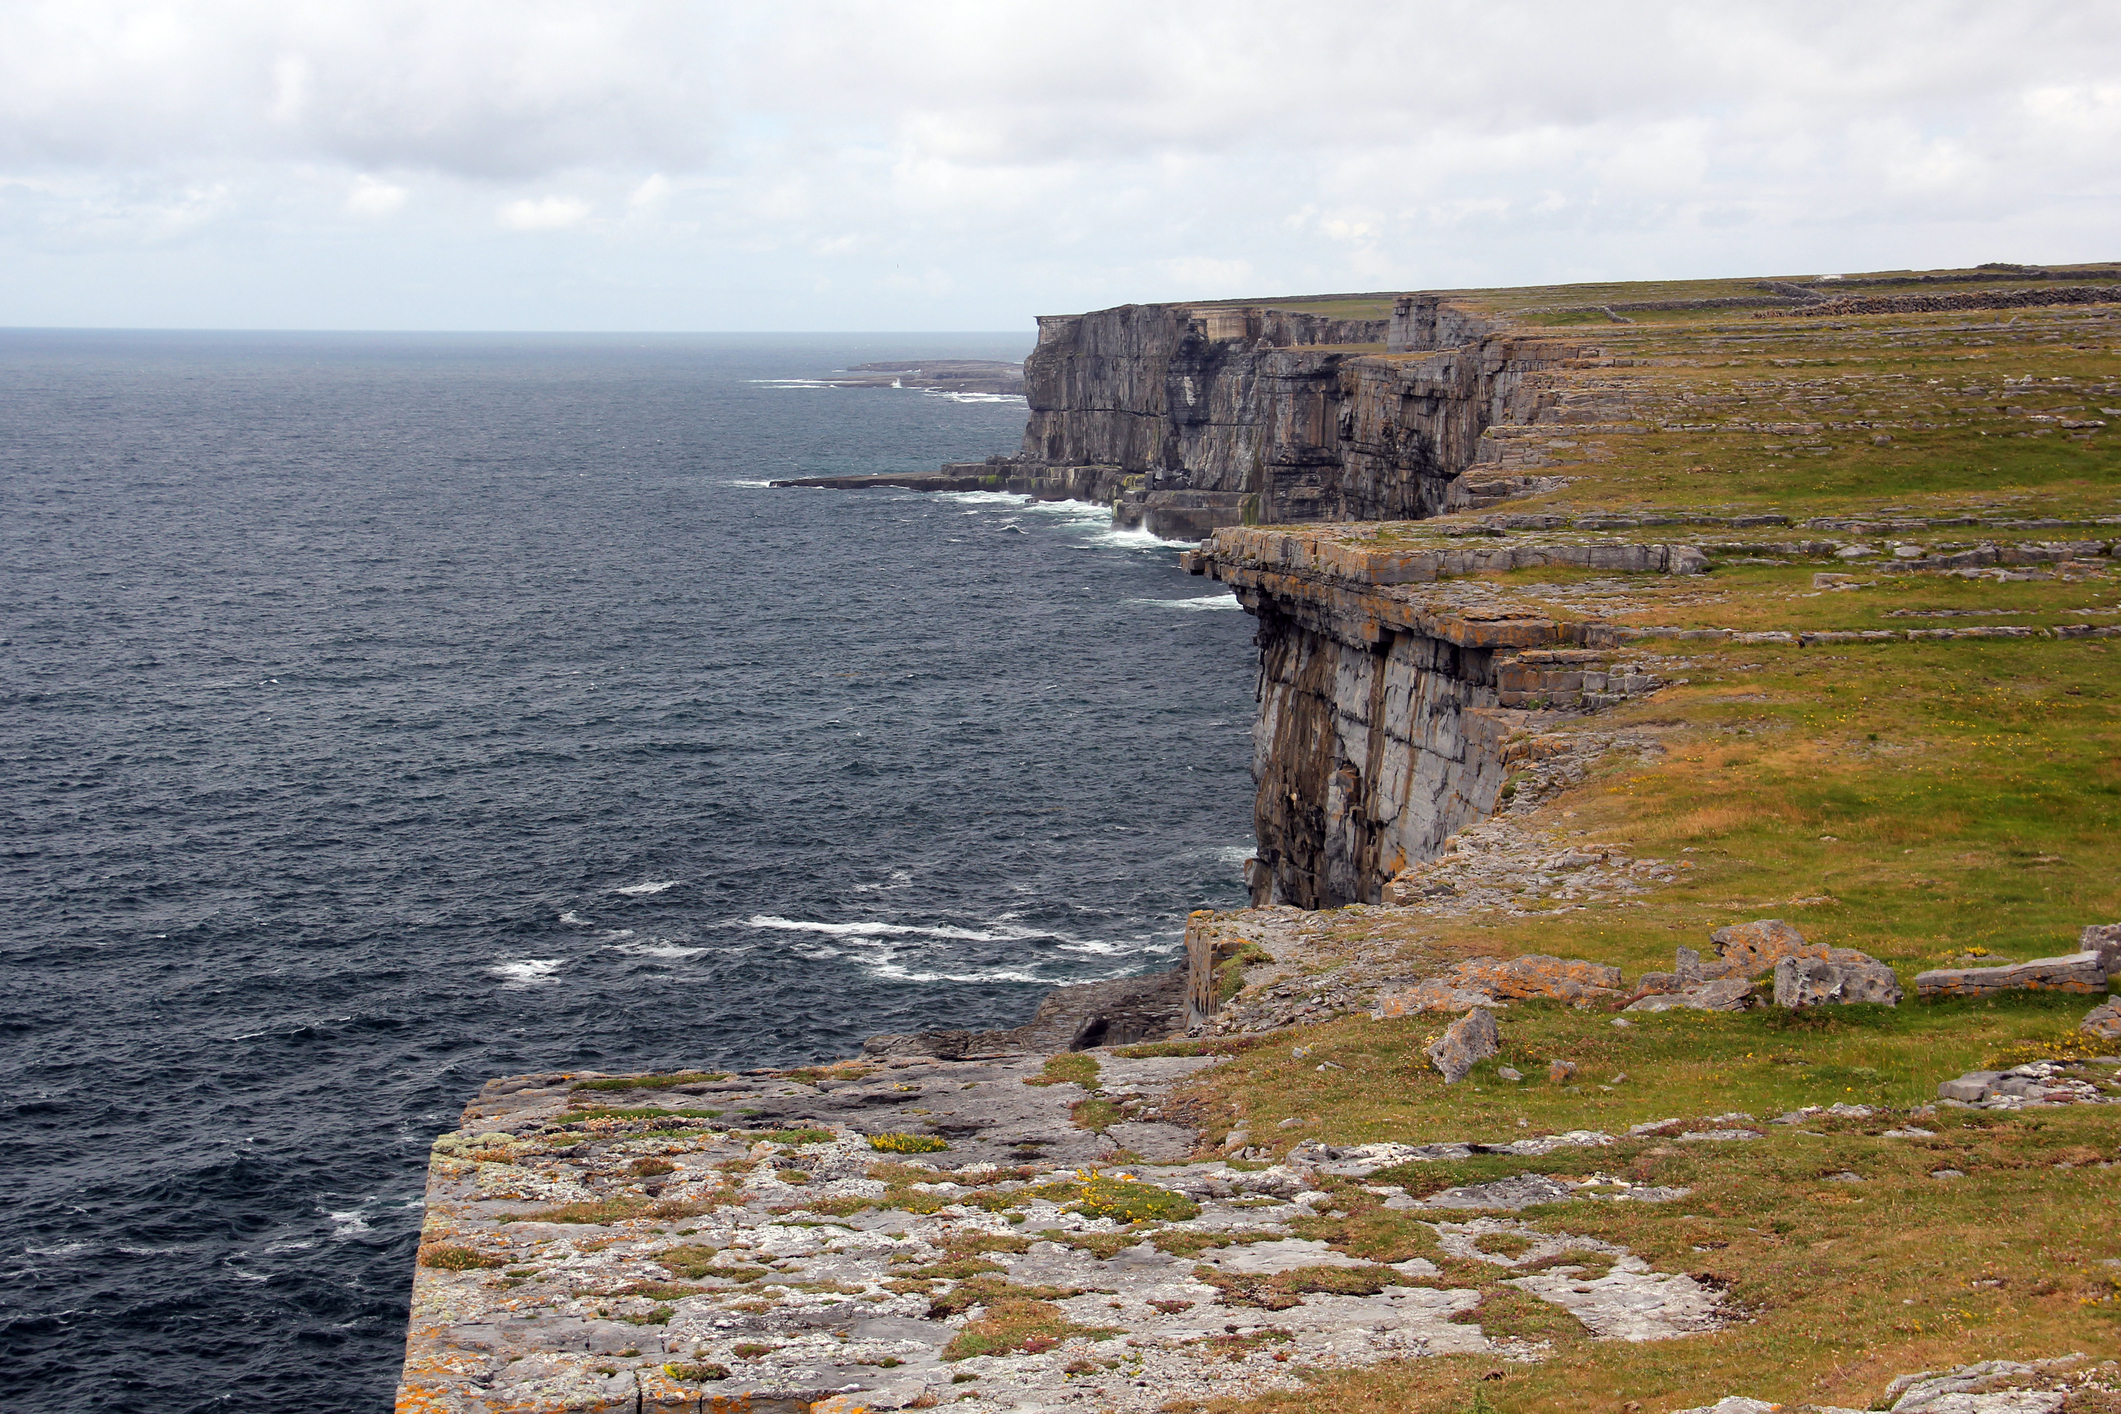 A view of the cliffs on Arranmore Island, Ireland